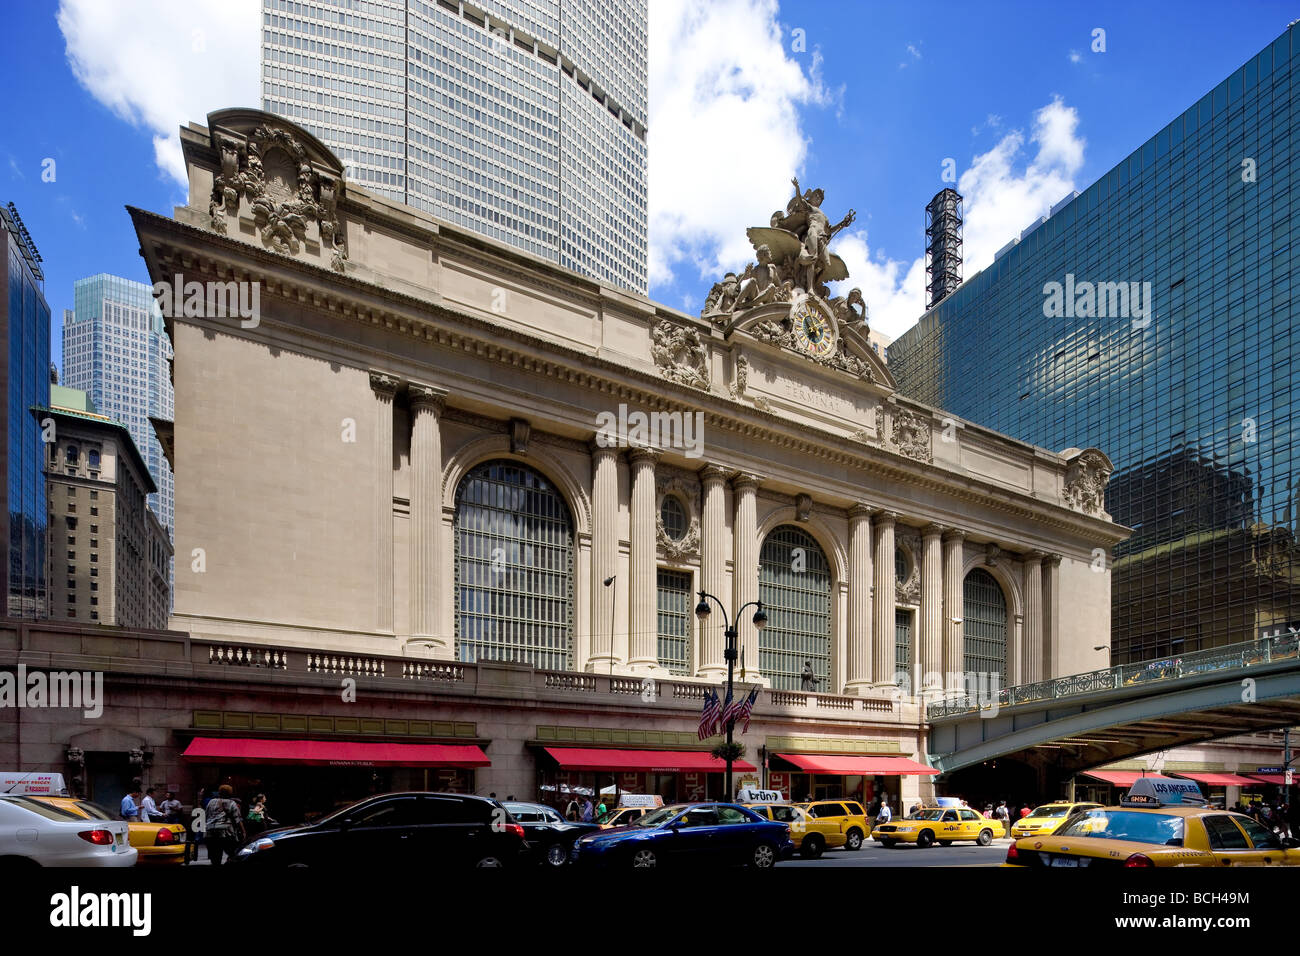 Grand Central Station Terminal in New York City Stock Photo